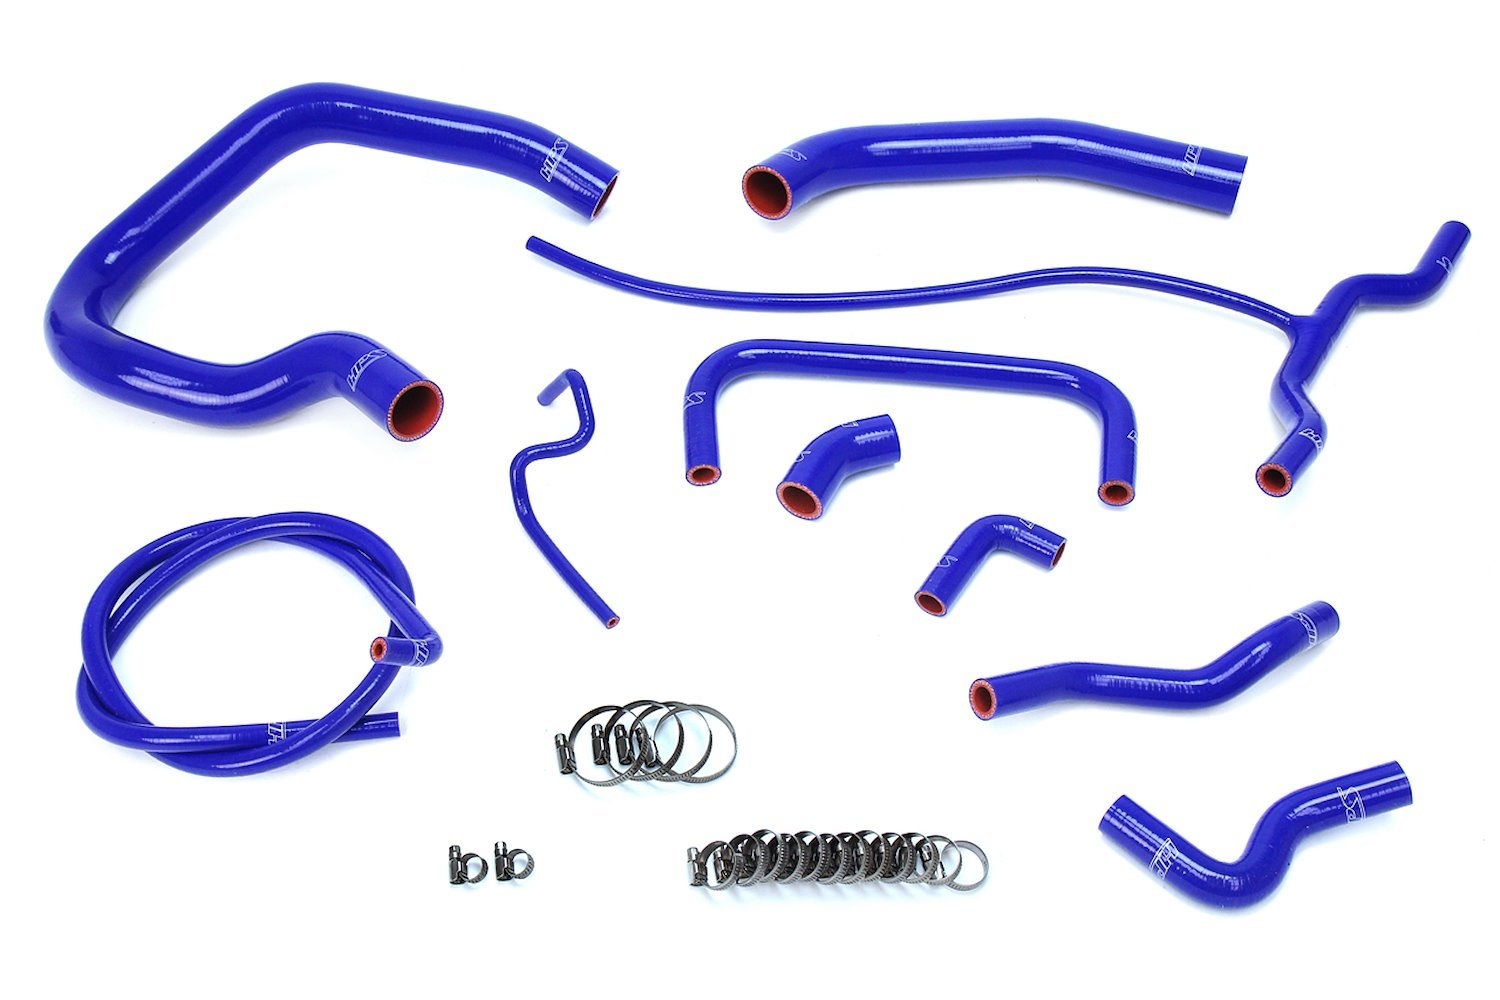 57-1661-BLUE Coolant Hose Kit, High-Temp 3-Ply Reinforced Silicone, Replace Rubber Radiator Heater Coolant Hoses